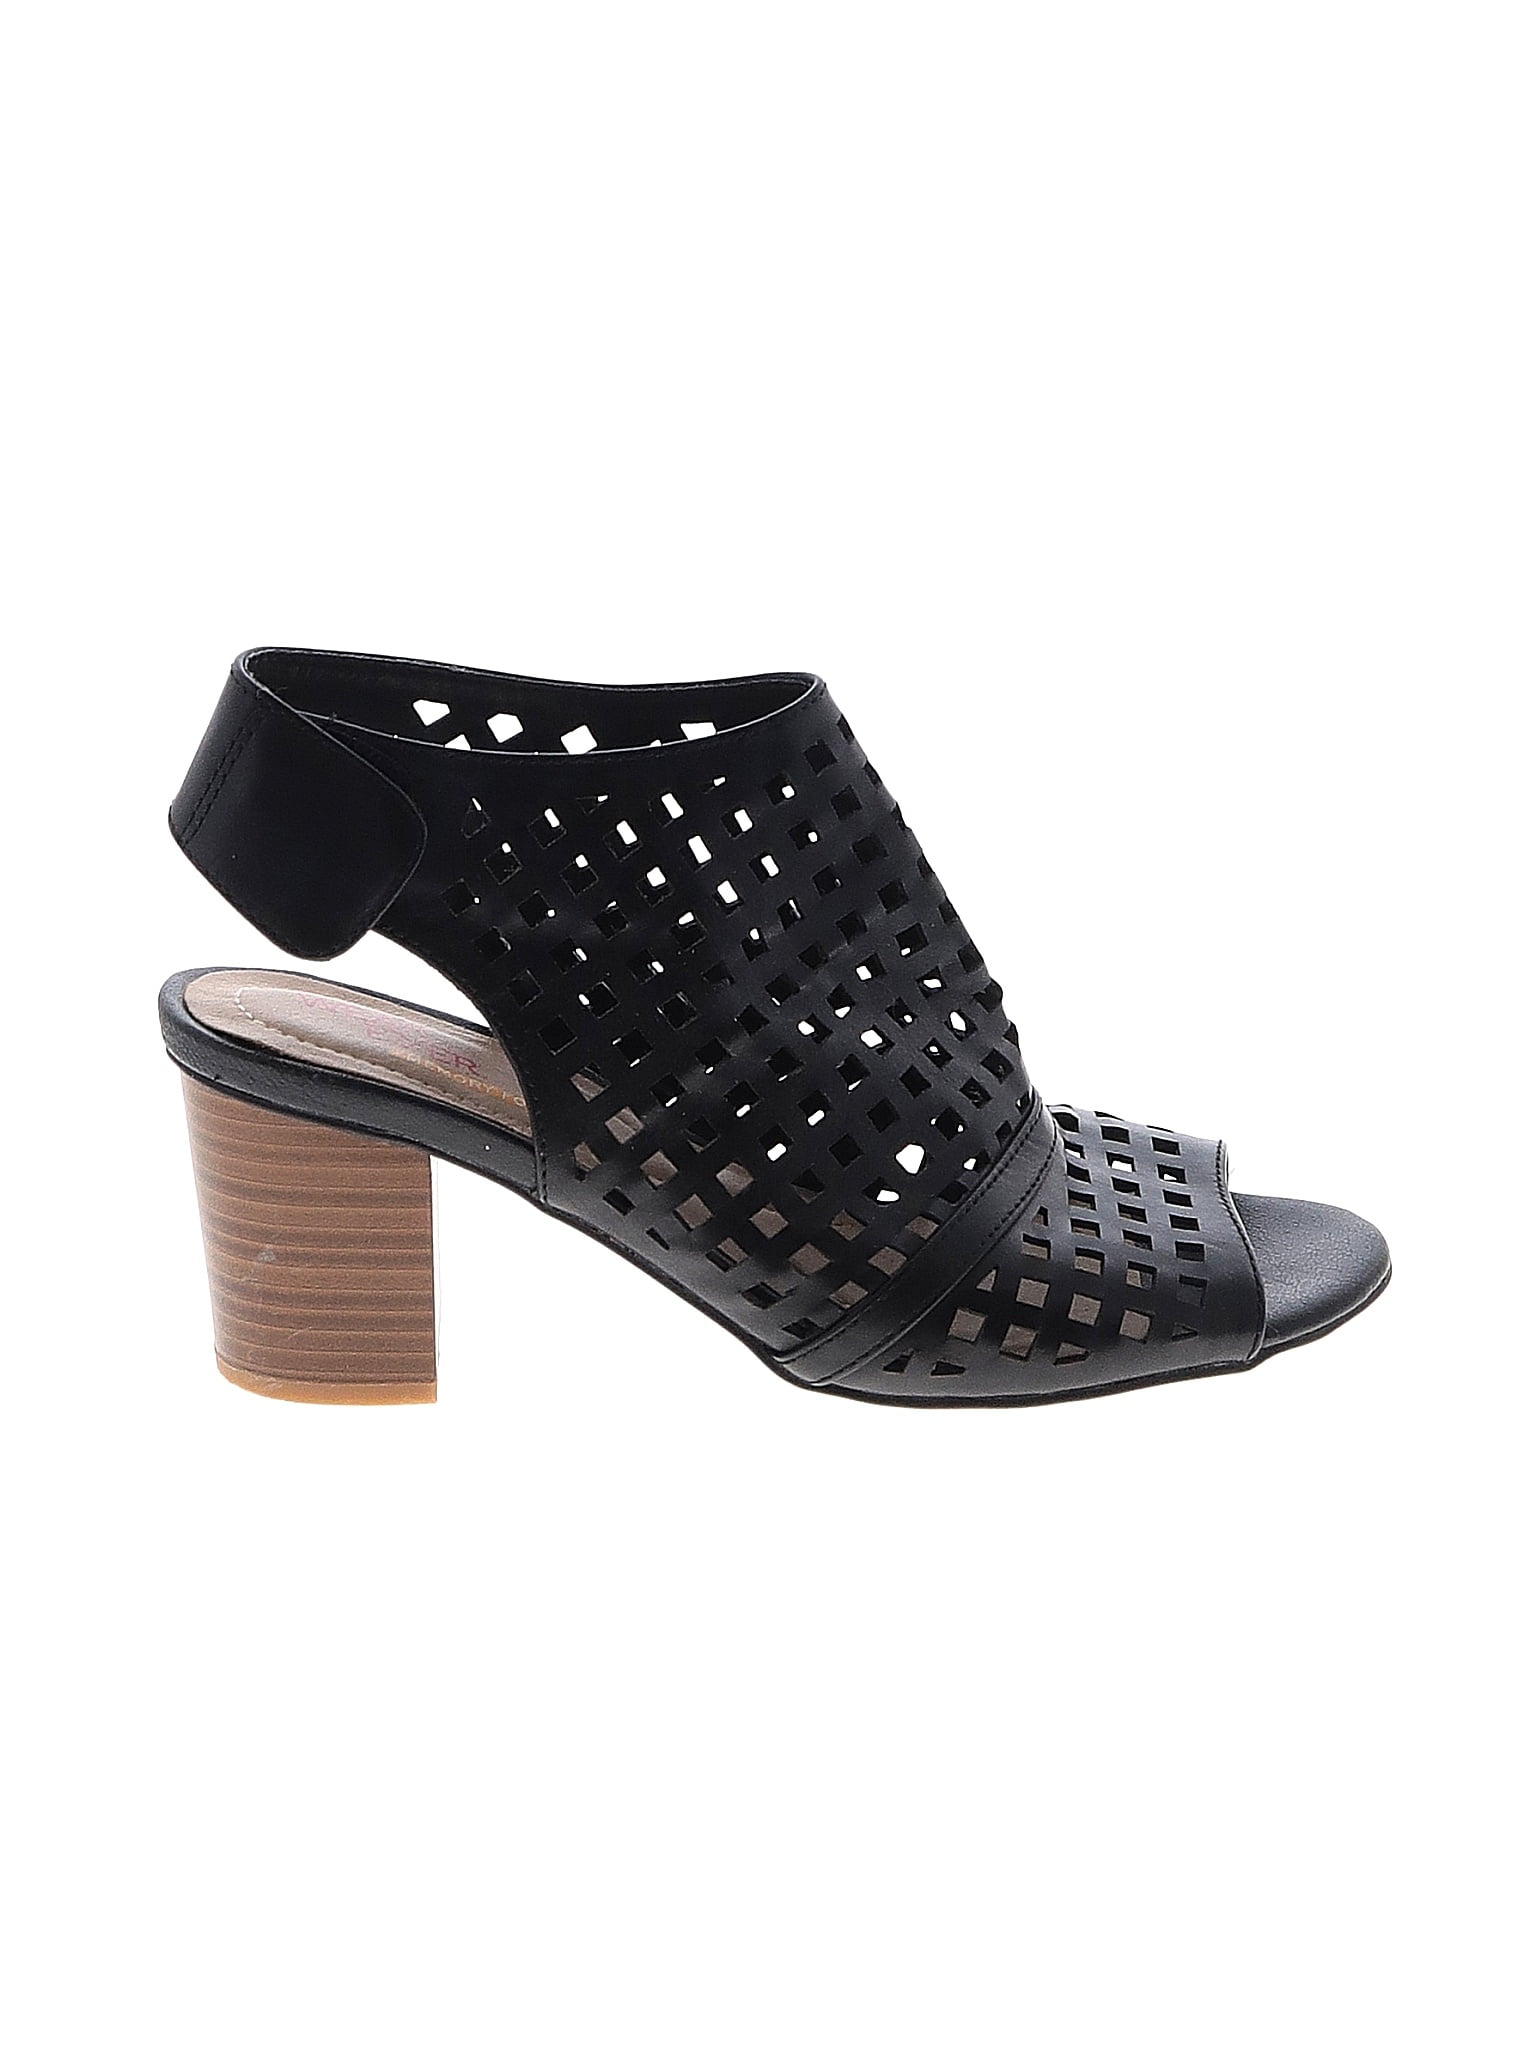 Shoes, Wearever Womens Sandal With Small Heel